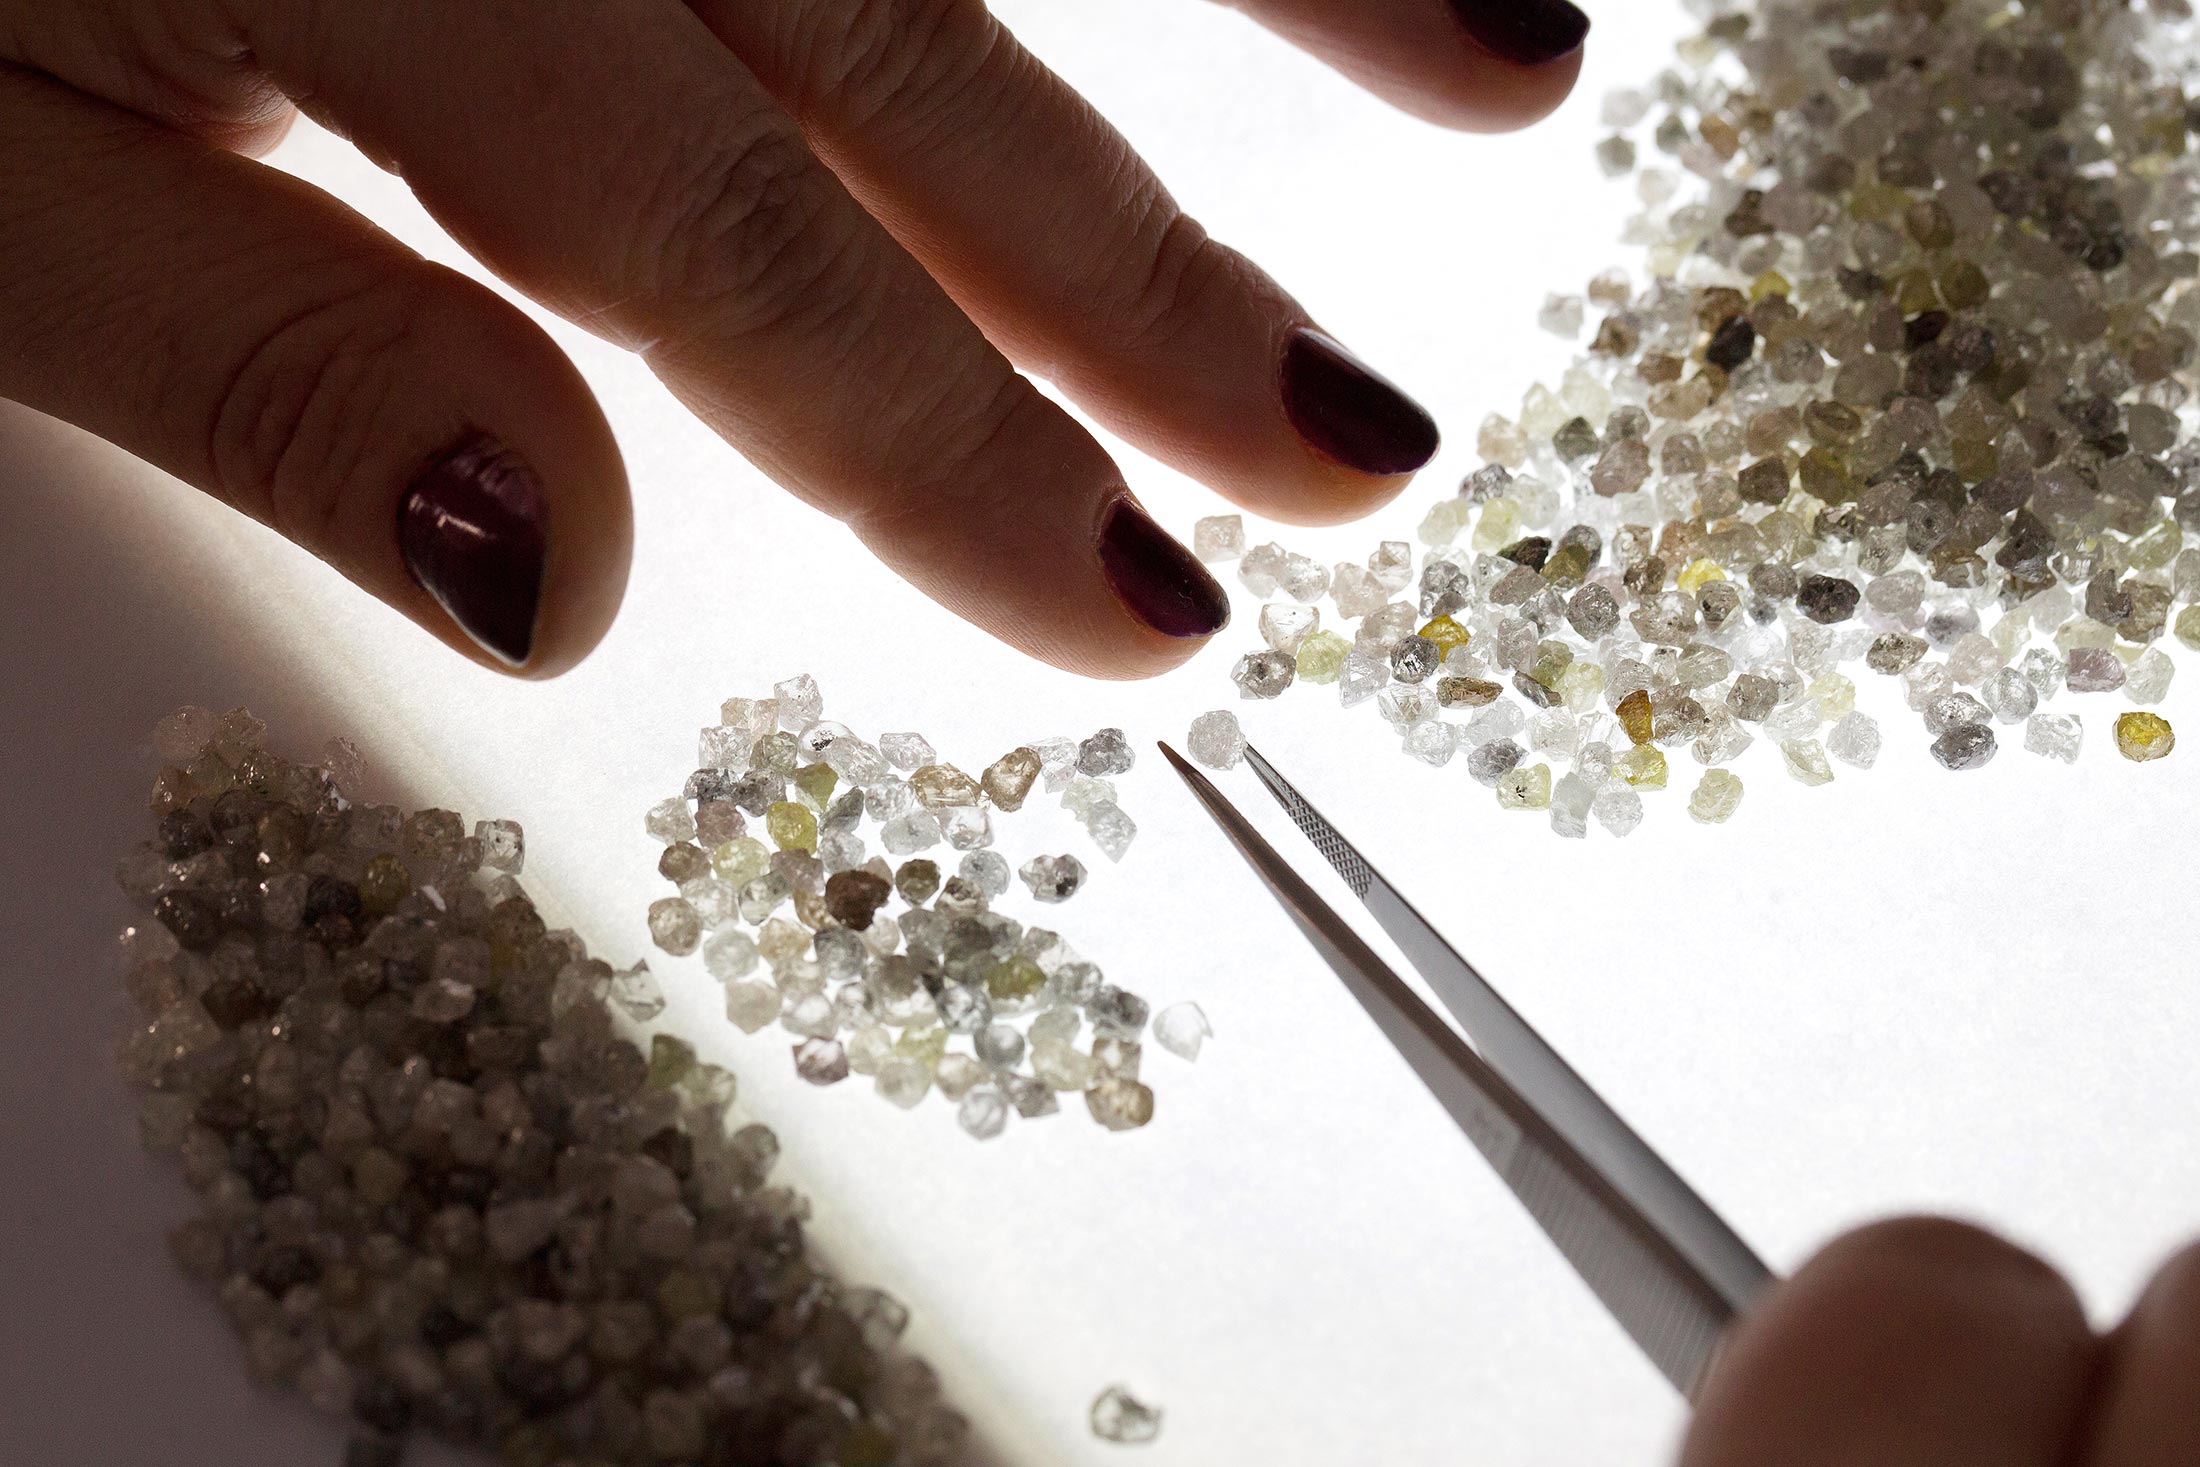 ALROSA Takes Steps to Offer the Market Additional Supplies of